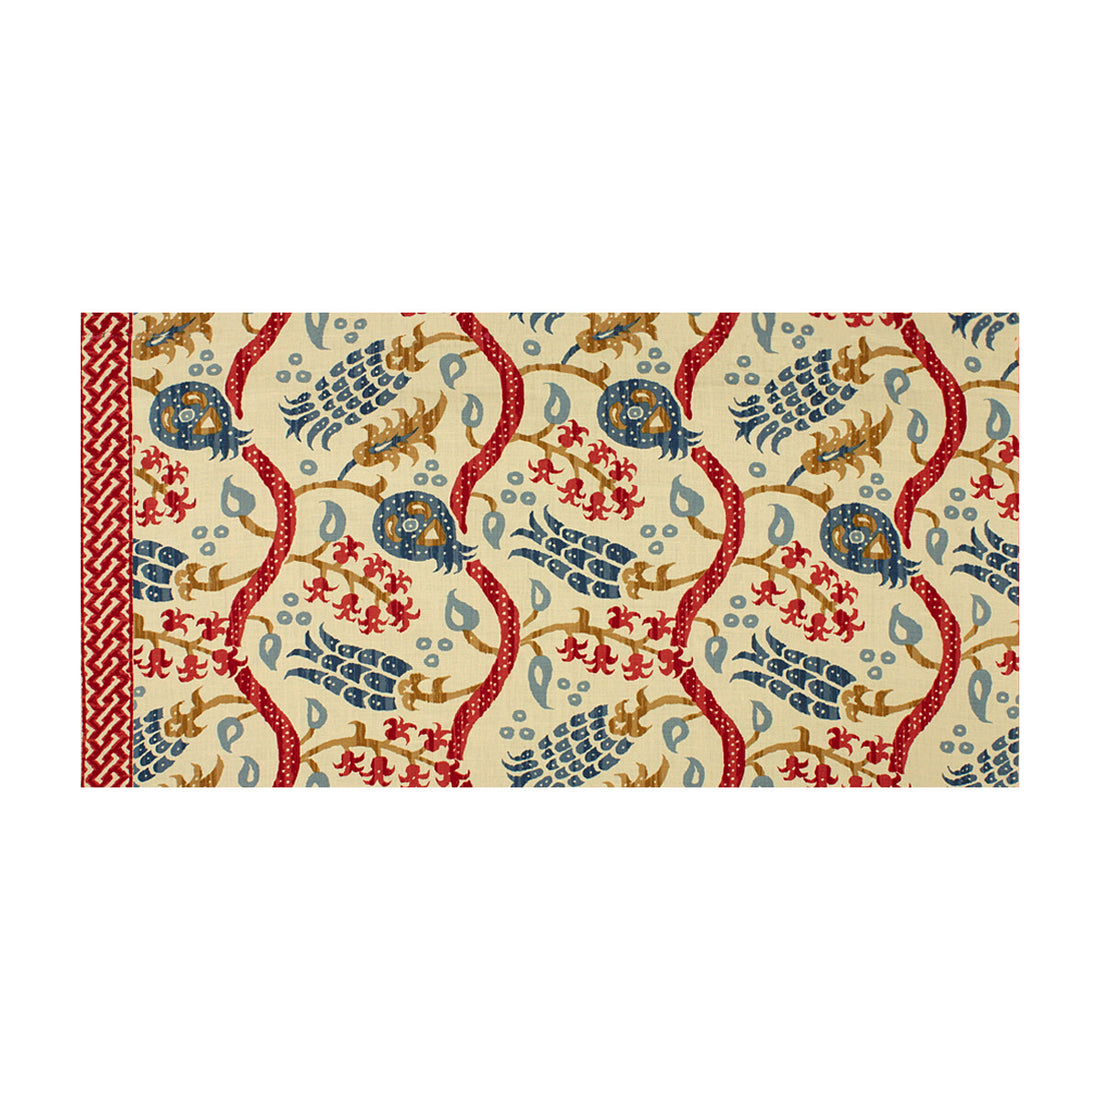 Nisiotiko Linen Print fabric in pomegranate/oxford blue color - pattern BR-700019.176.0 - by Brunschwig &amp; Fils in the Les Alizes collection